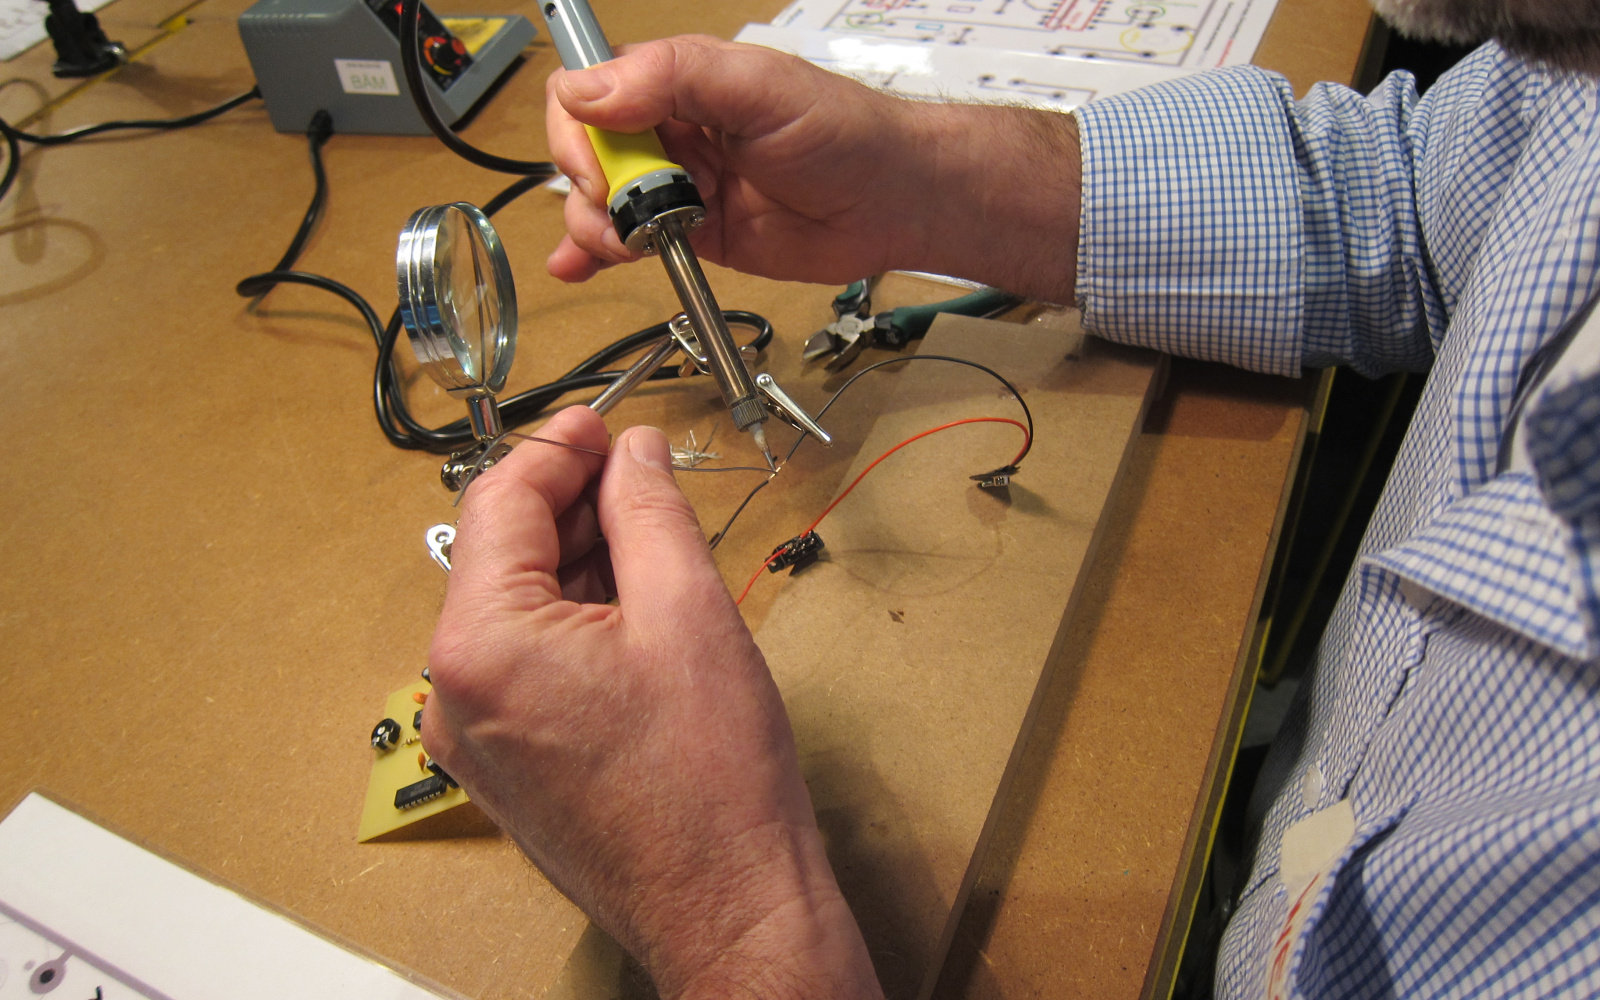 A man is soldering two wires together.